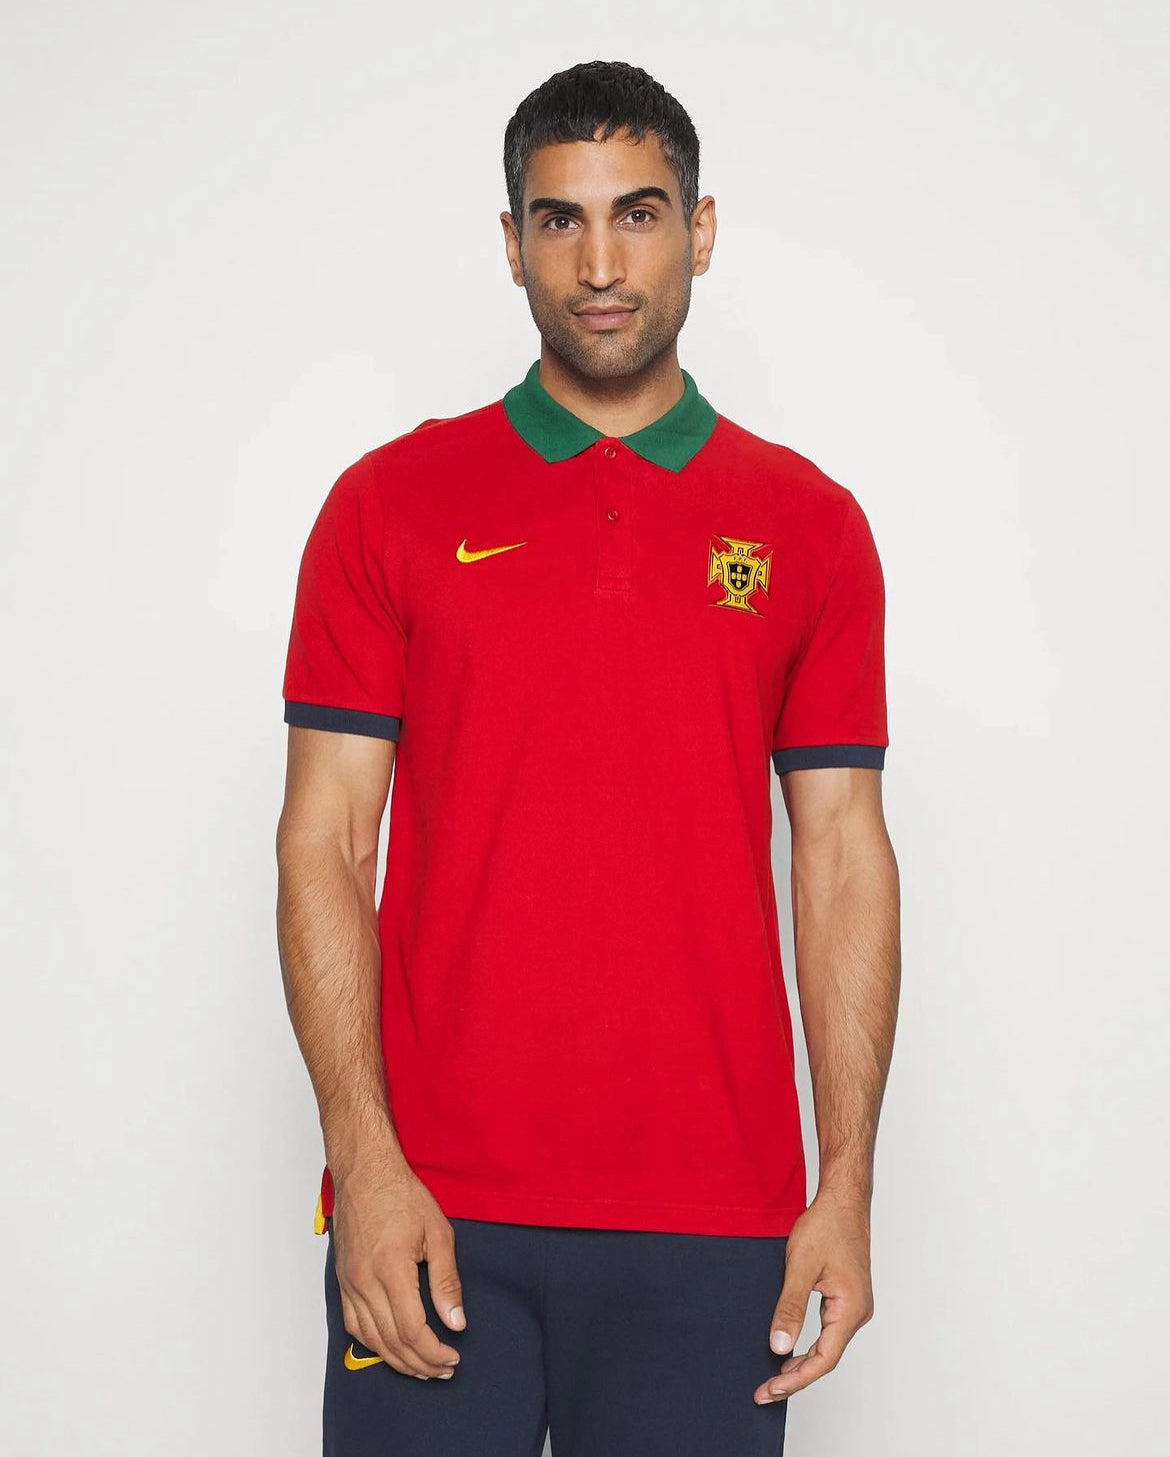 Portugal national polo jersey